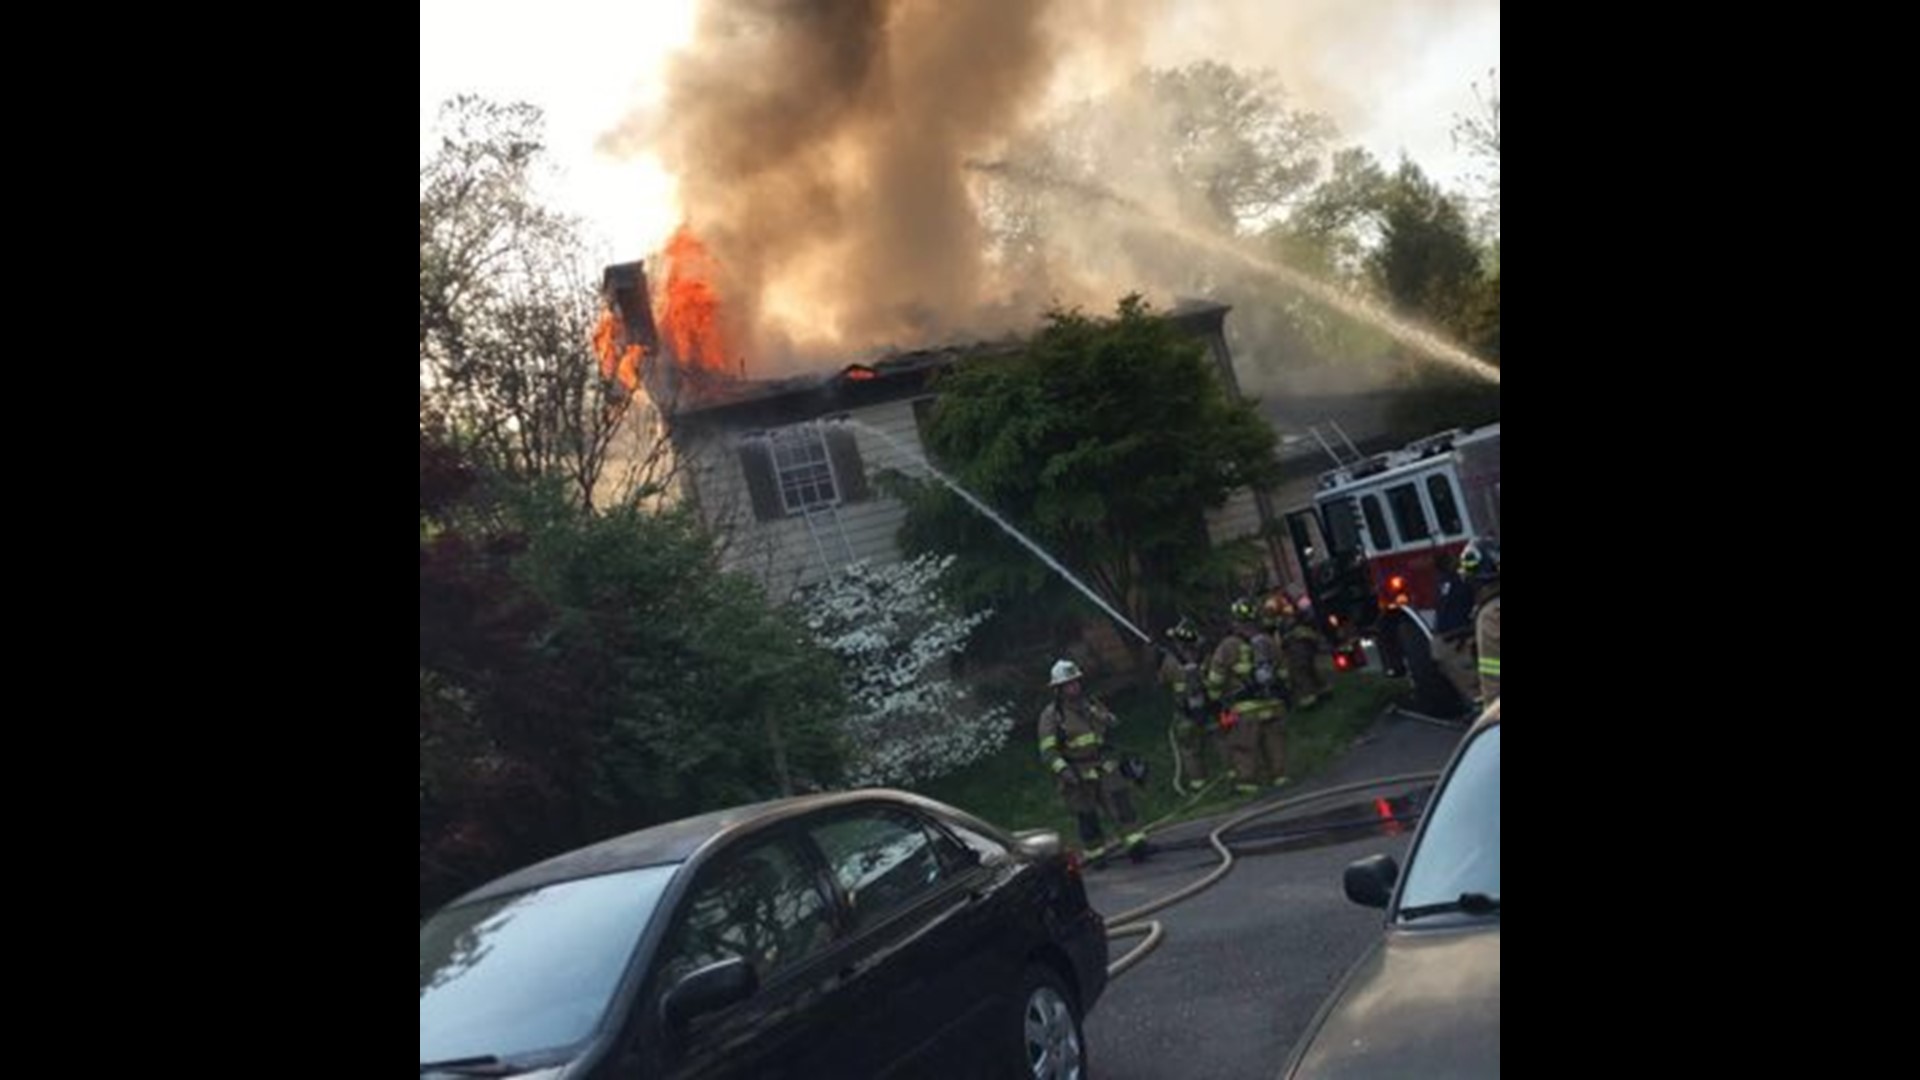 One person is dead after a house fire in McLean, fire officials said. The fire broke out around noon on Saturday in the 1400 block of Brookhaven Drive, according to the Fairfax County Fire and Rescue Department.